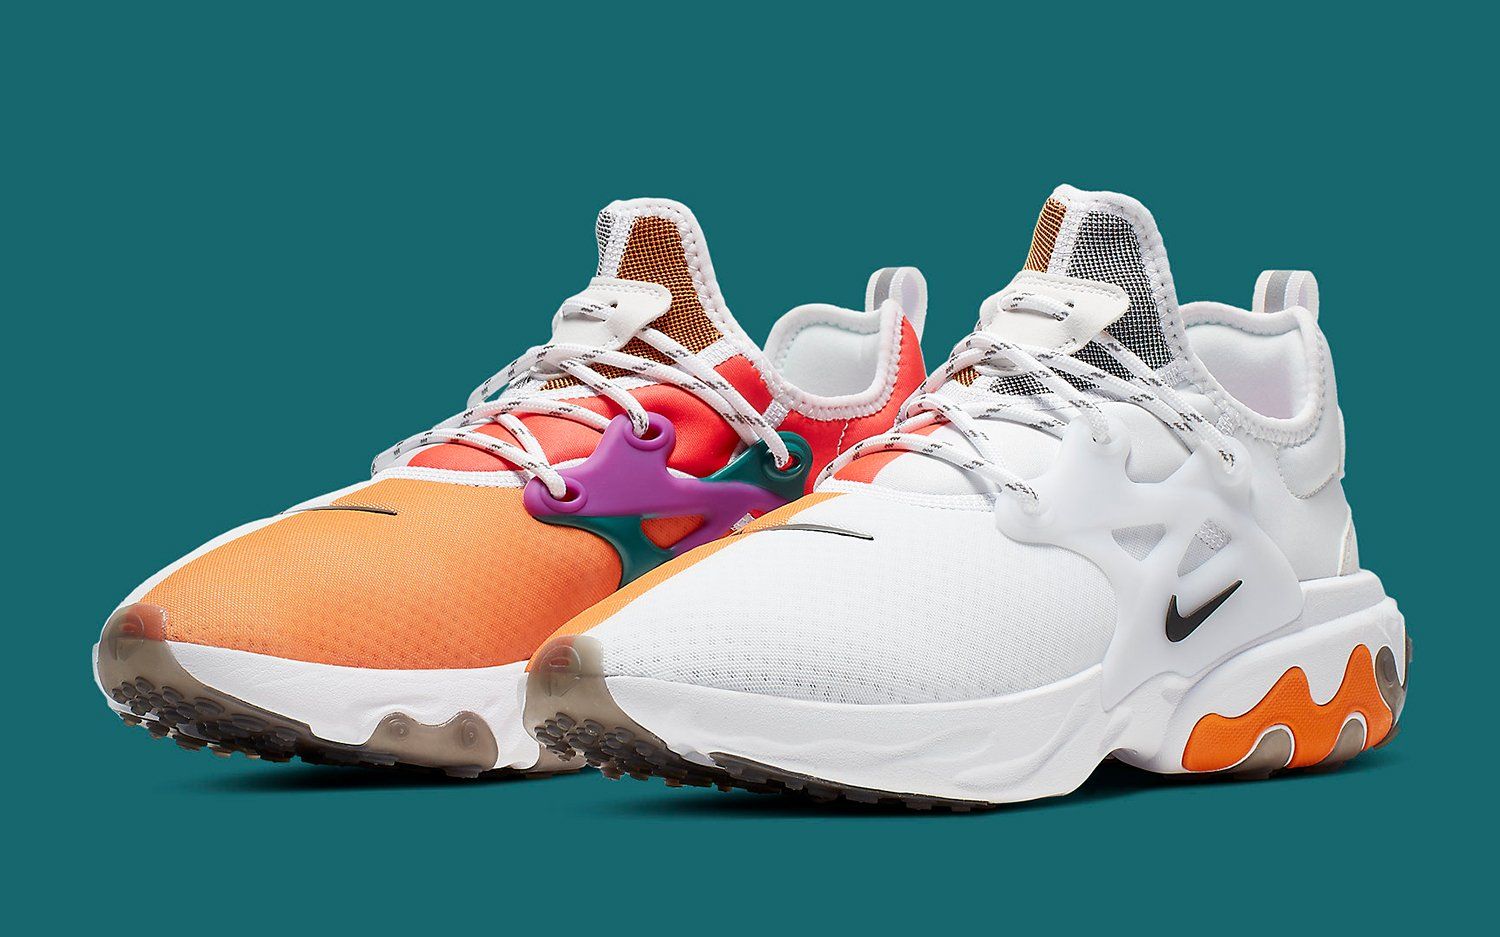 Japan's BEAMS to Release Culturally-Inspired Nike React Presto 